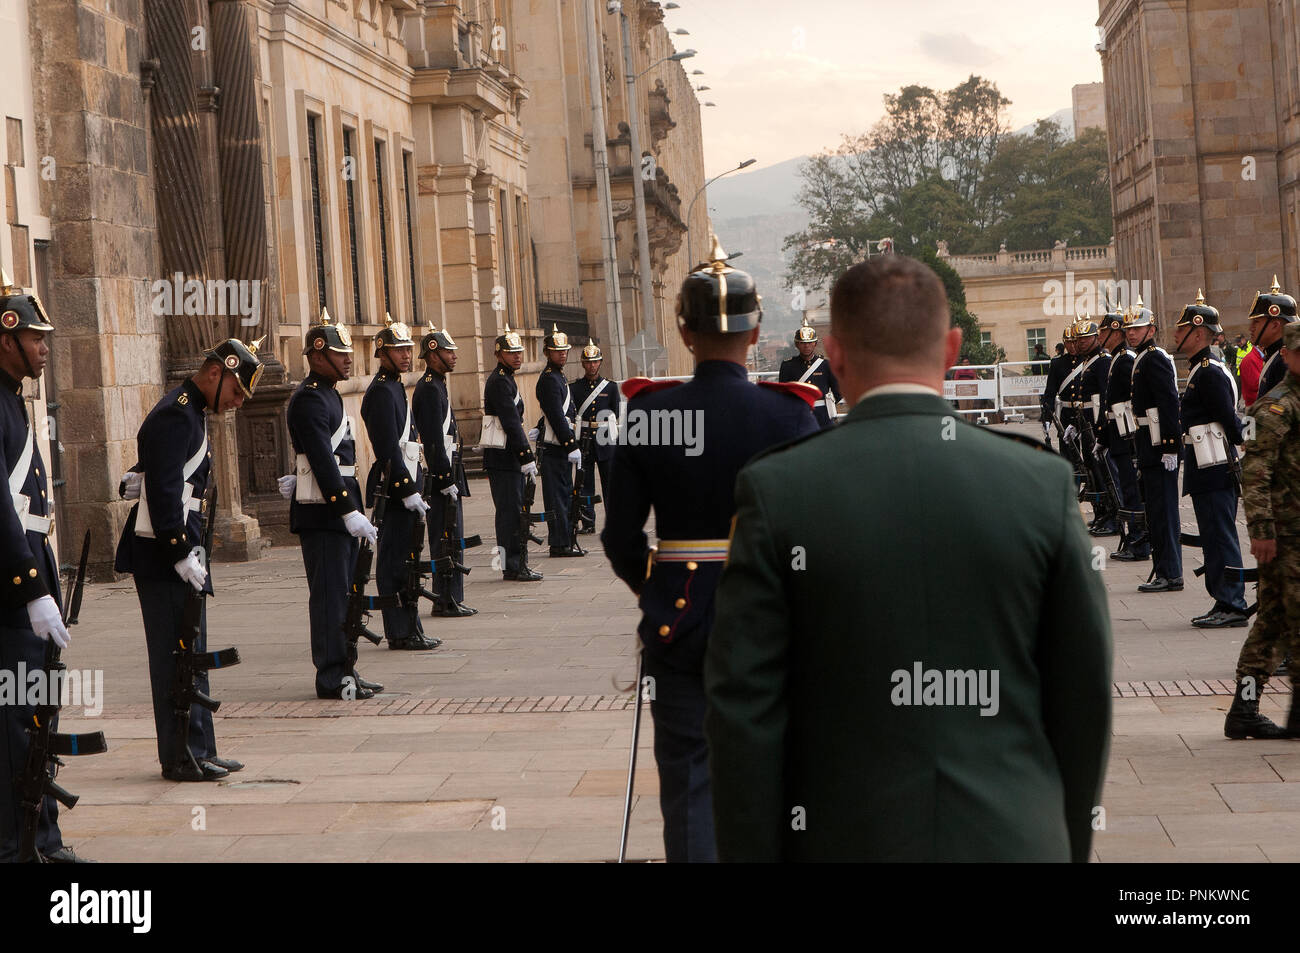 Columbian soldiers forming an honor guard for religios ceremony Stock Photo